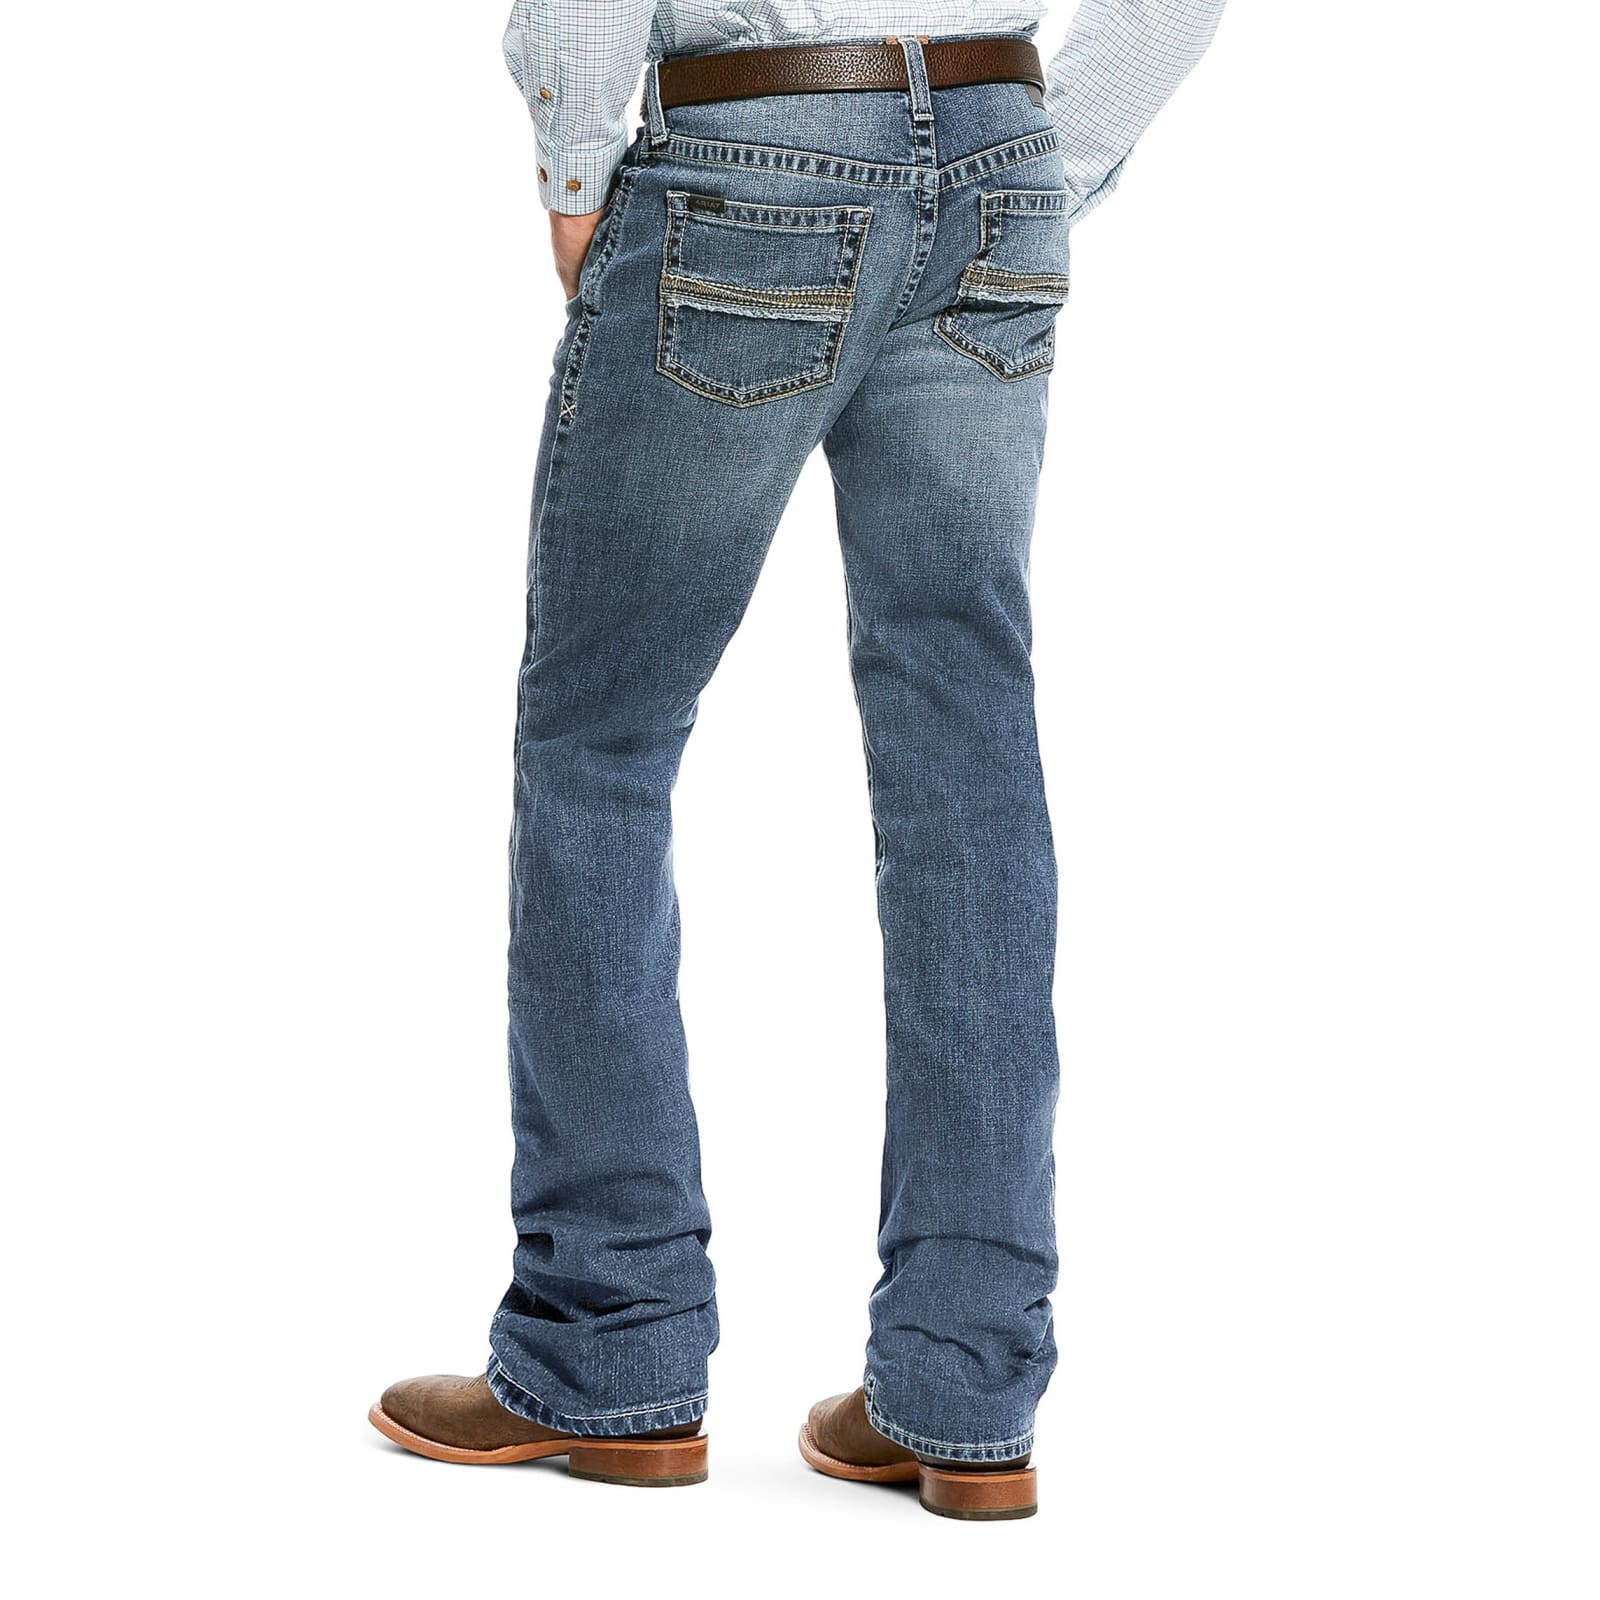 Men's M2 Grayson Medium Wash Stretch Slim Fit Boot Cut Jeans available at Cavenders